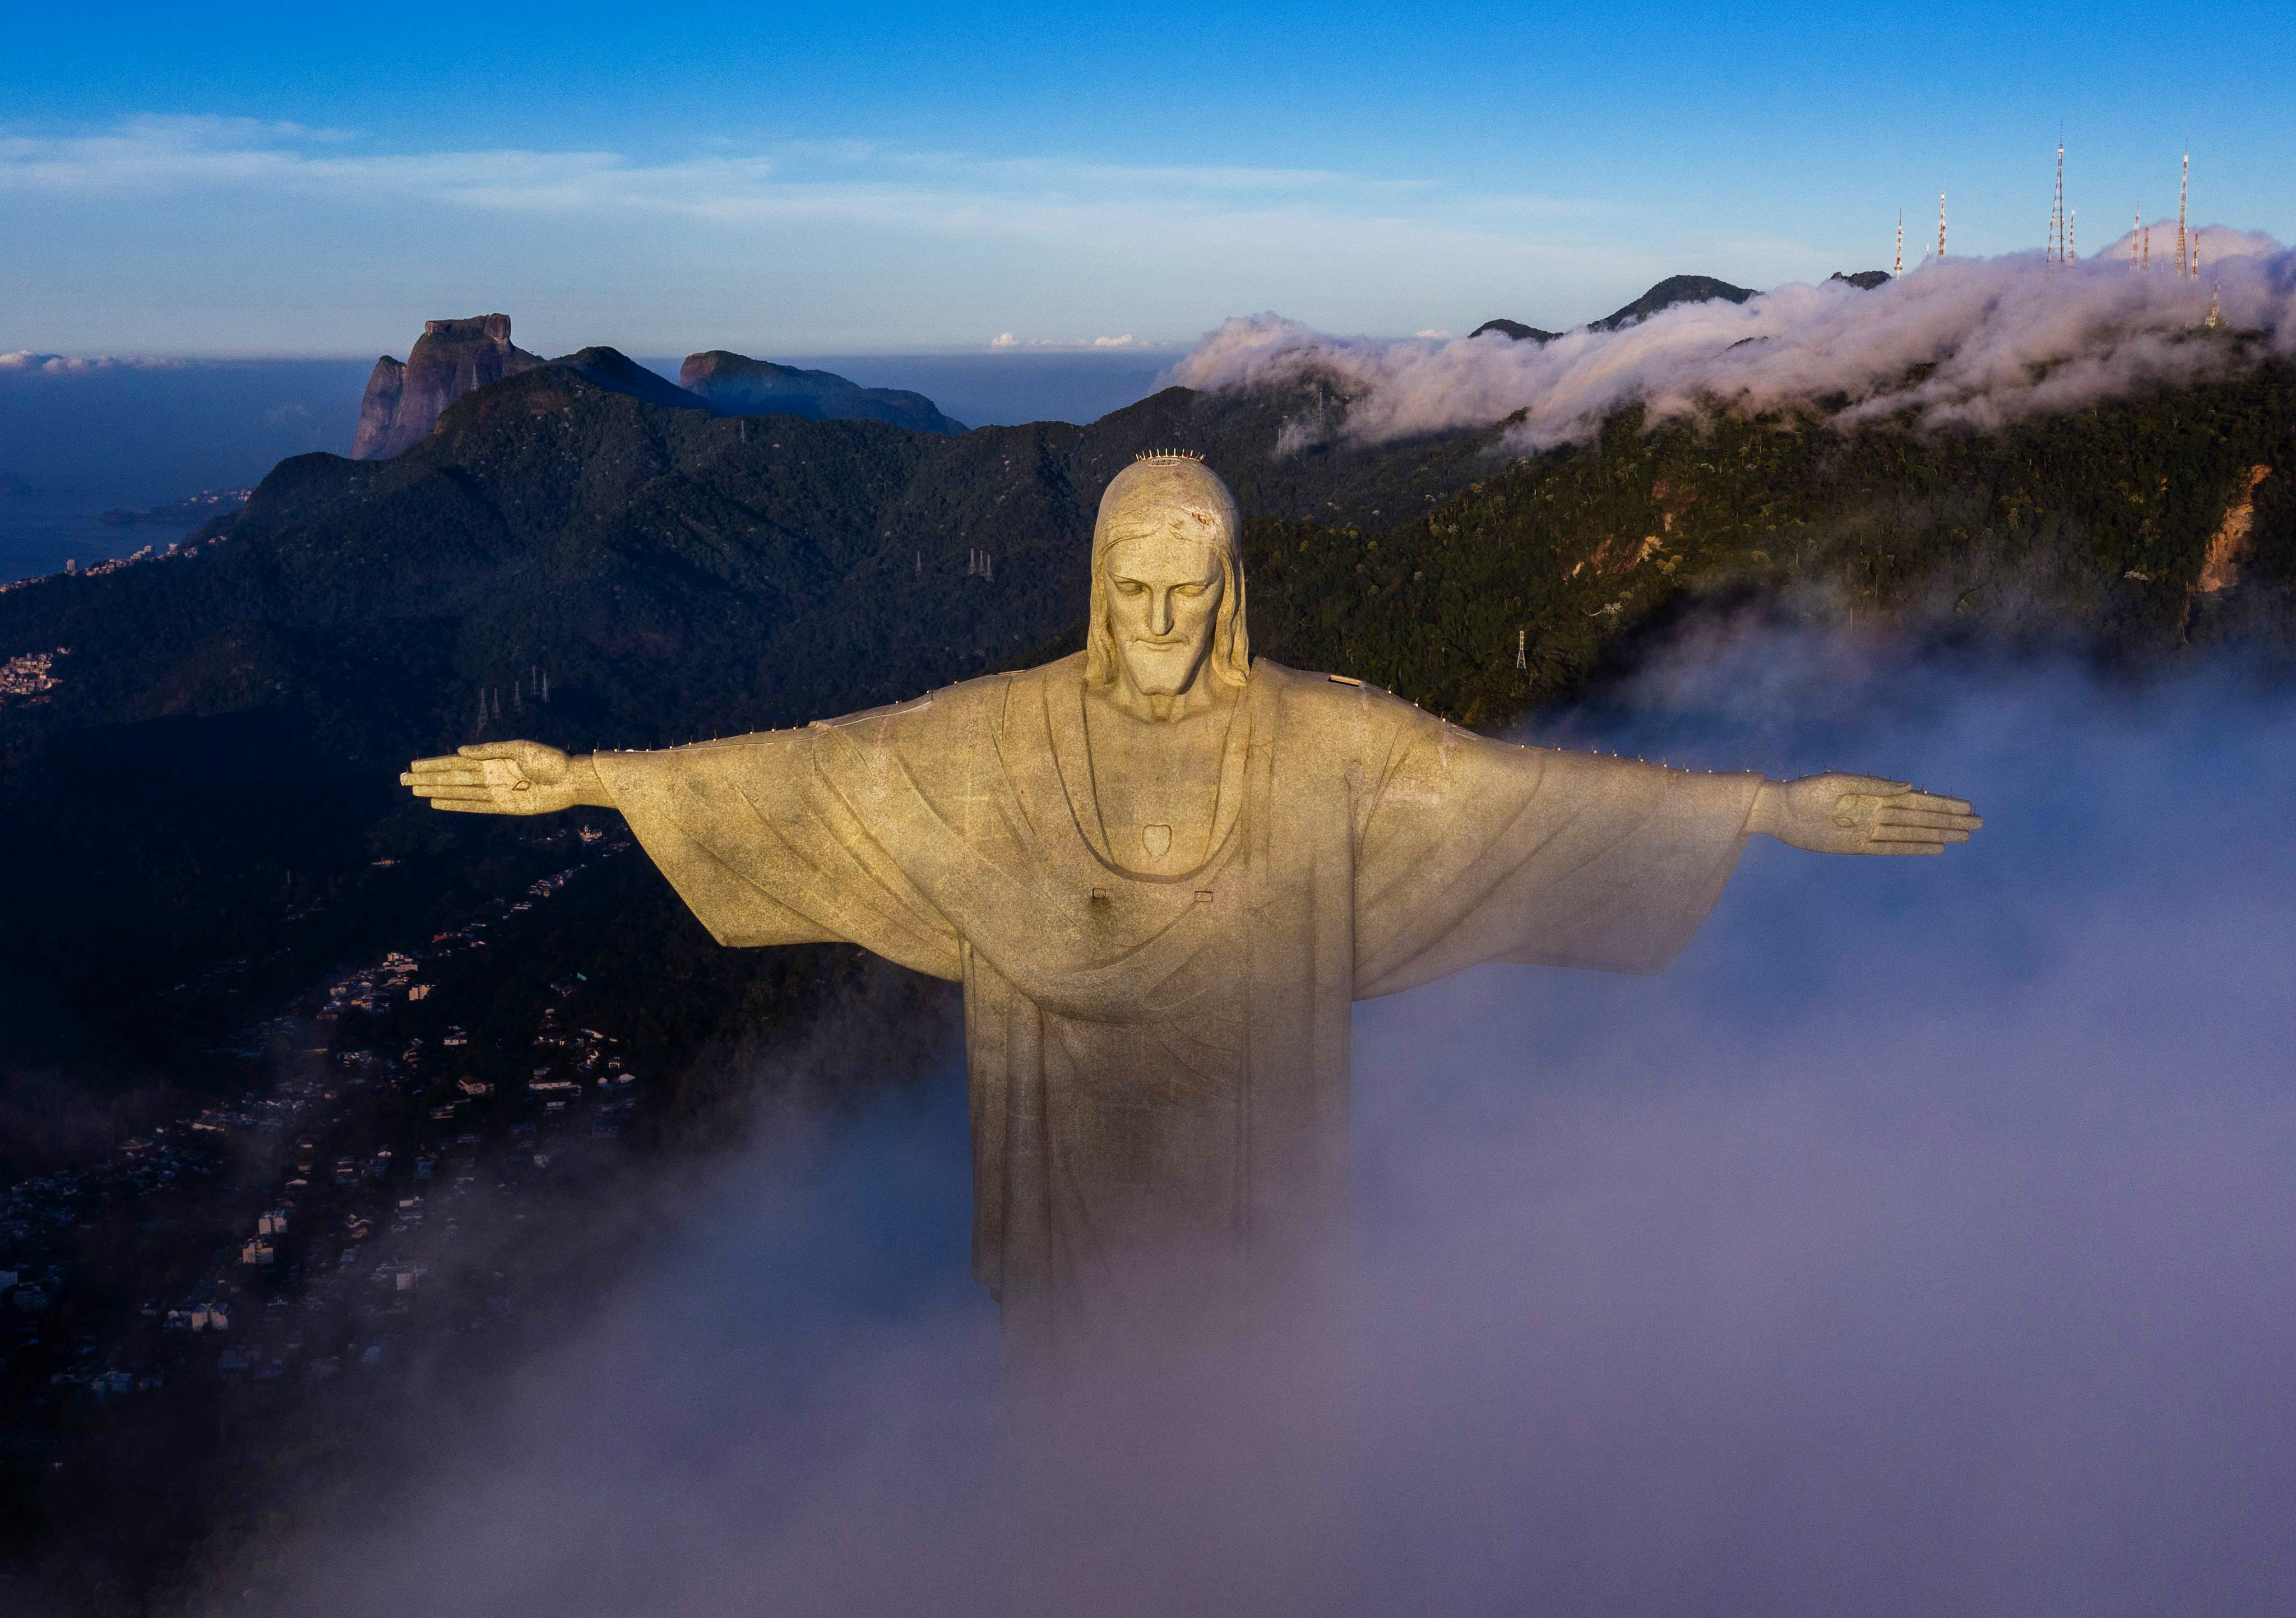 The Christ the Redeemer statue in Rio de Janeiro, Brazil, has been dubbed the most dangerous wonder of the world thanks to the spate of muggings - some at gunpoint - of hikers making their way up to the statue. Photo: AFP